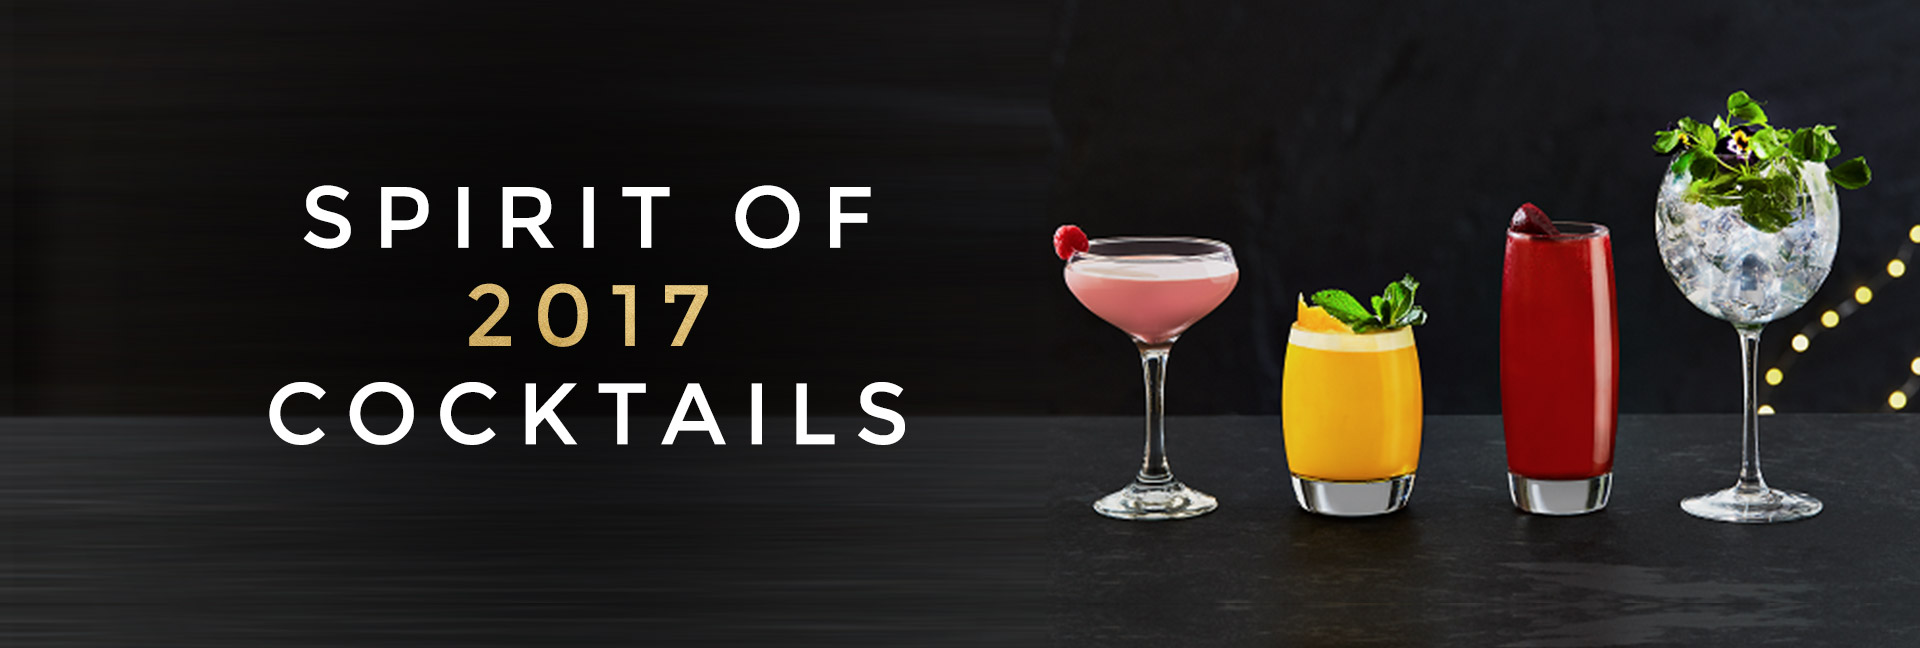 Spirit of 2017 cocktails at All Bar One Houndsditch